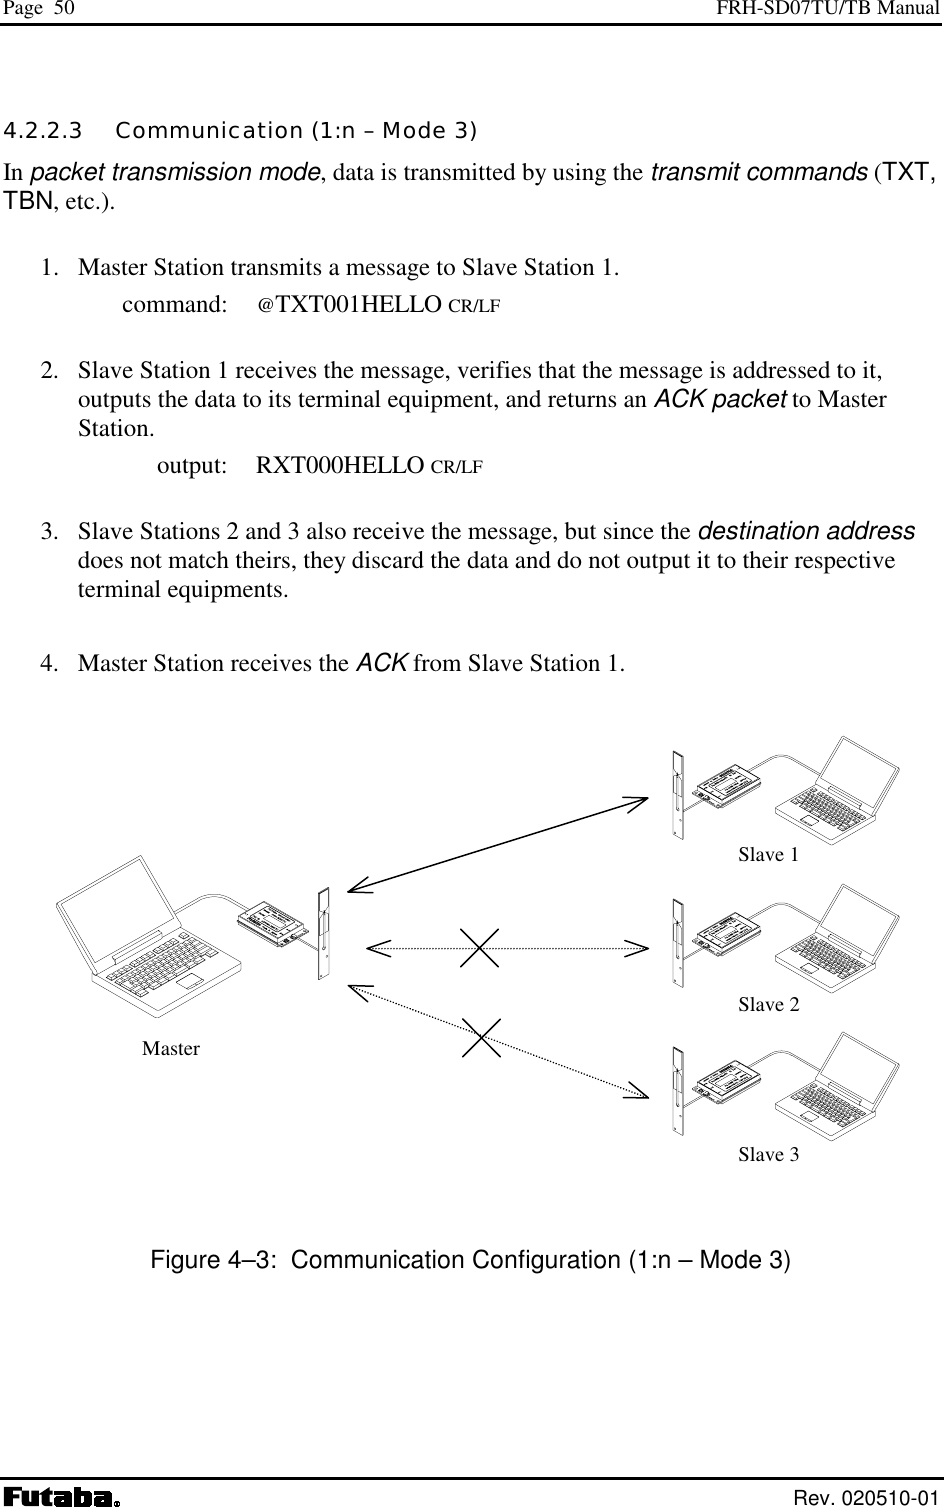 Page  50  FRH-SD07TU/TB Manual  Rev. 020510-01 4.2.2.3   Communication (1:n – Mode 3) In packet transmission mode, data is transmitted by using the transmit commands (TXT, TBN, etc.).   1.  Master Station transmits a message to Slave Station 1.  command: @TXT001HELLO CR/LF   2.  Slave Station 1 receives the message, verifies that the message is addressed to it, outputs the data to its terminal equipment, and returns an ACK packet to Master Station.  output: RXT000HELLO CR/LF   3.  Slave Stations 2 and 3 also receive the message, but since the destination address does not match theirs, they discard the data and do not output it to their respective terminal equipments.   4.  Master Station receives the ACK from Slave Station 1.                                                              Figure 4–3:  Communication Configuration (1:n – Mode 3) Slave 1 Slave 2 Slave 3 Master 